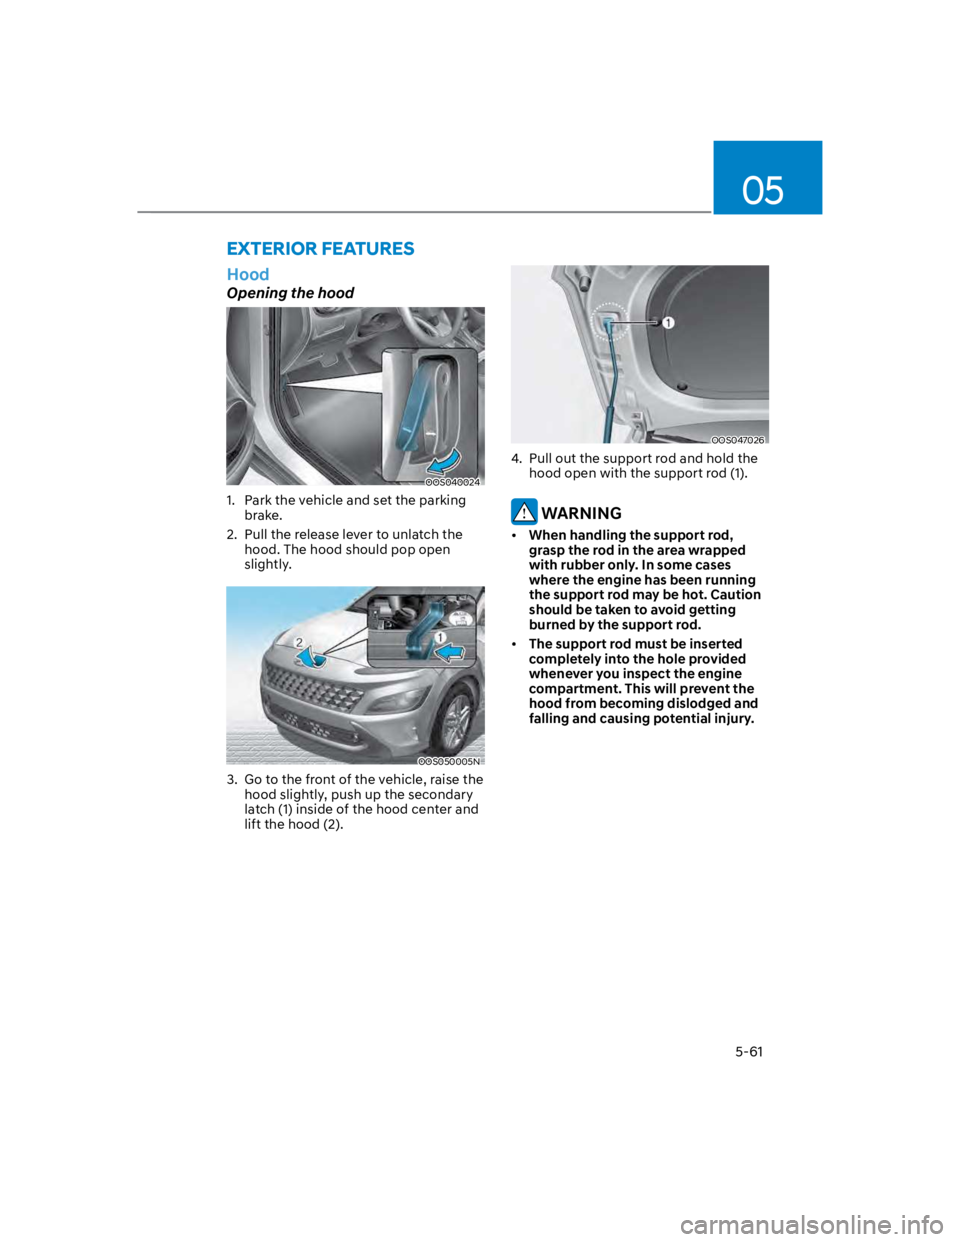 HYUNDAI KONA 2022  Owners Manual 05
5-61
Hood
Opening the hood
OOS040024 
1.  Park the vehicle and set the parking 
brake.
2.  Pull the release lever to unlatch the 
hood. The hood should pop open 
slightly.
OOS050005N
3.  Go to the 